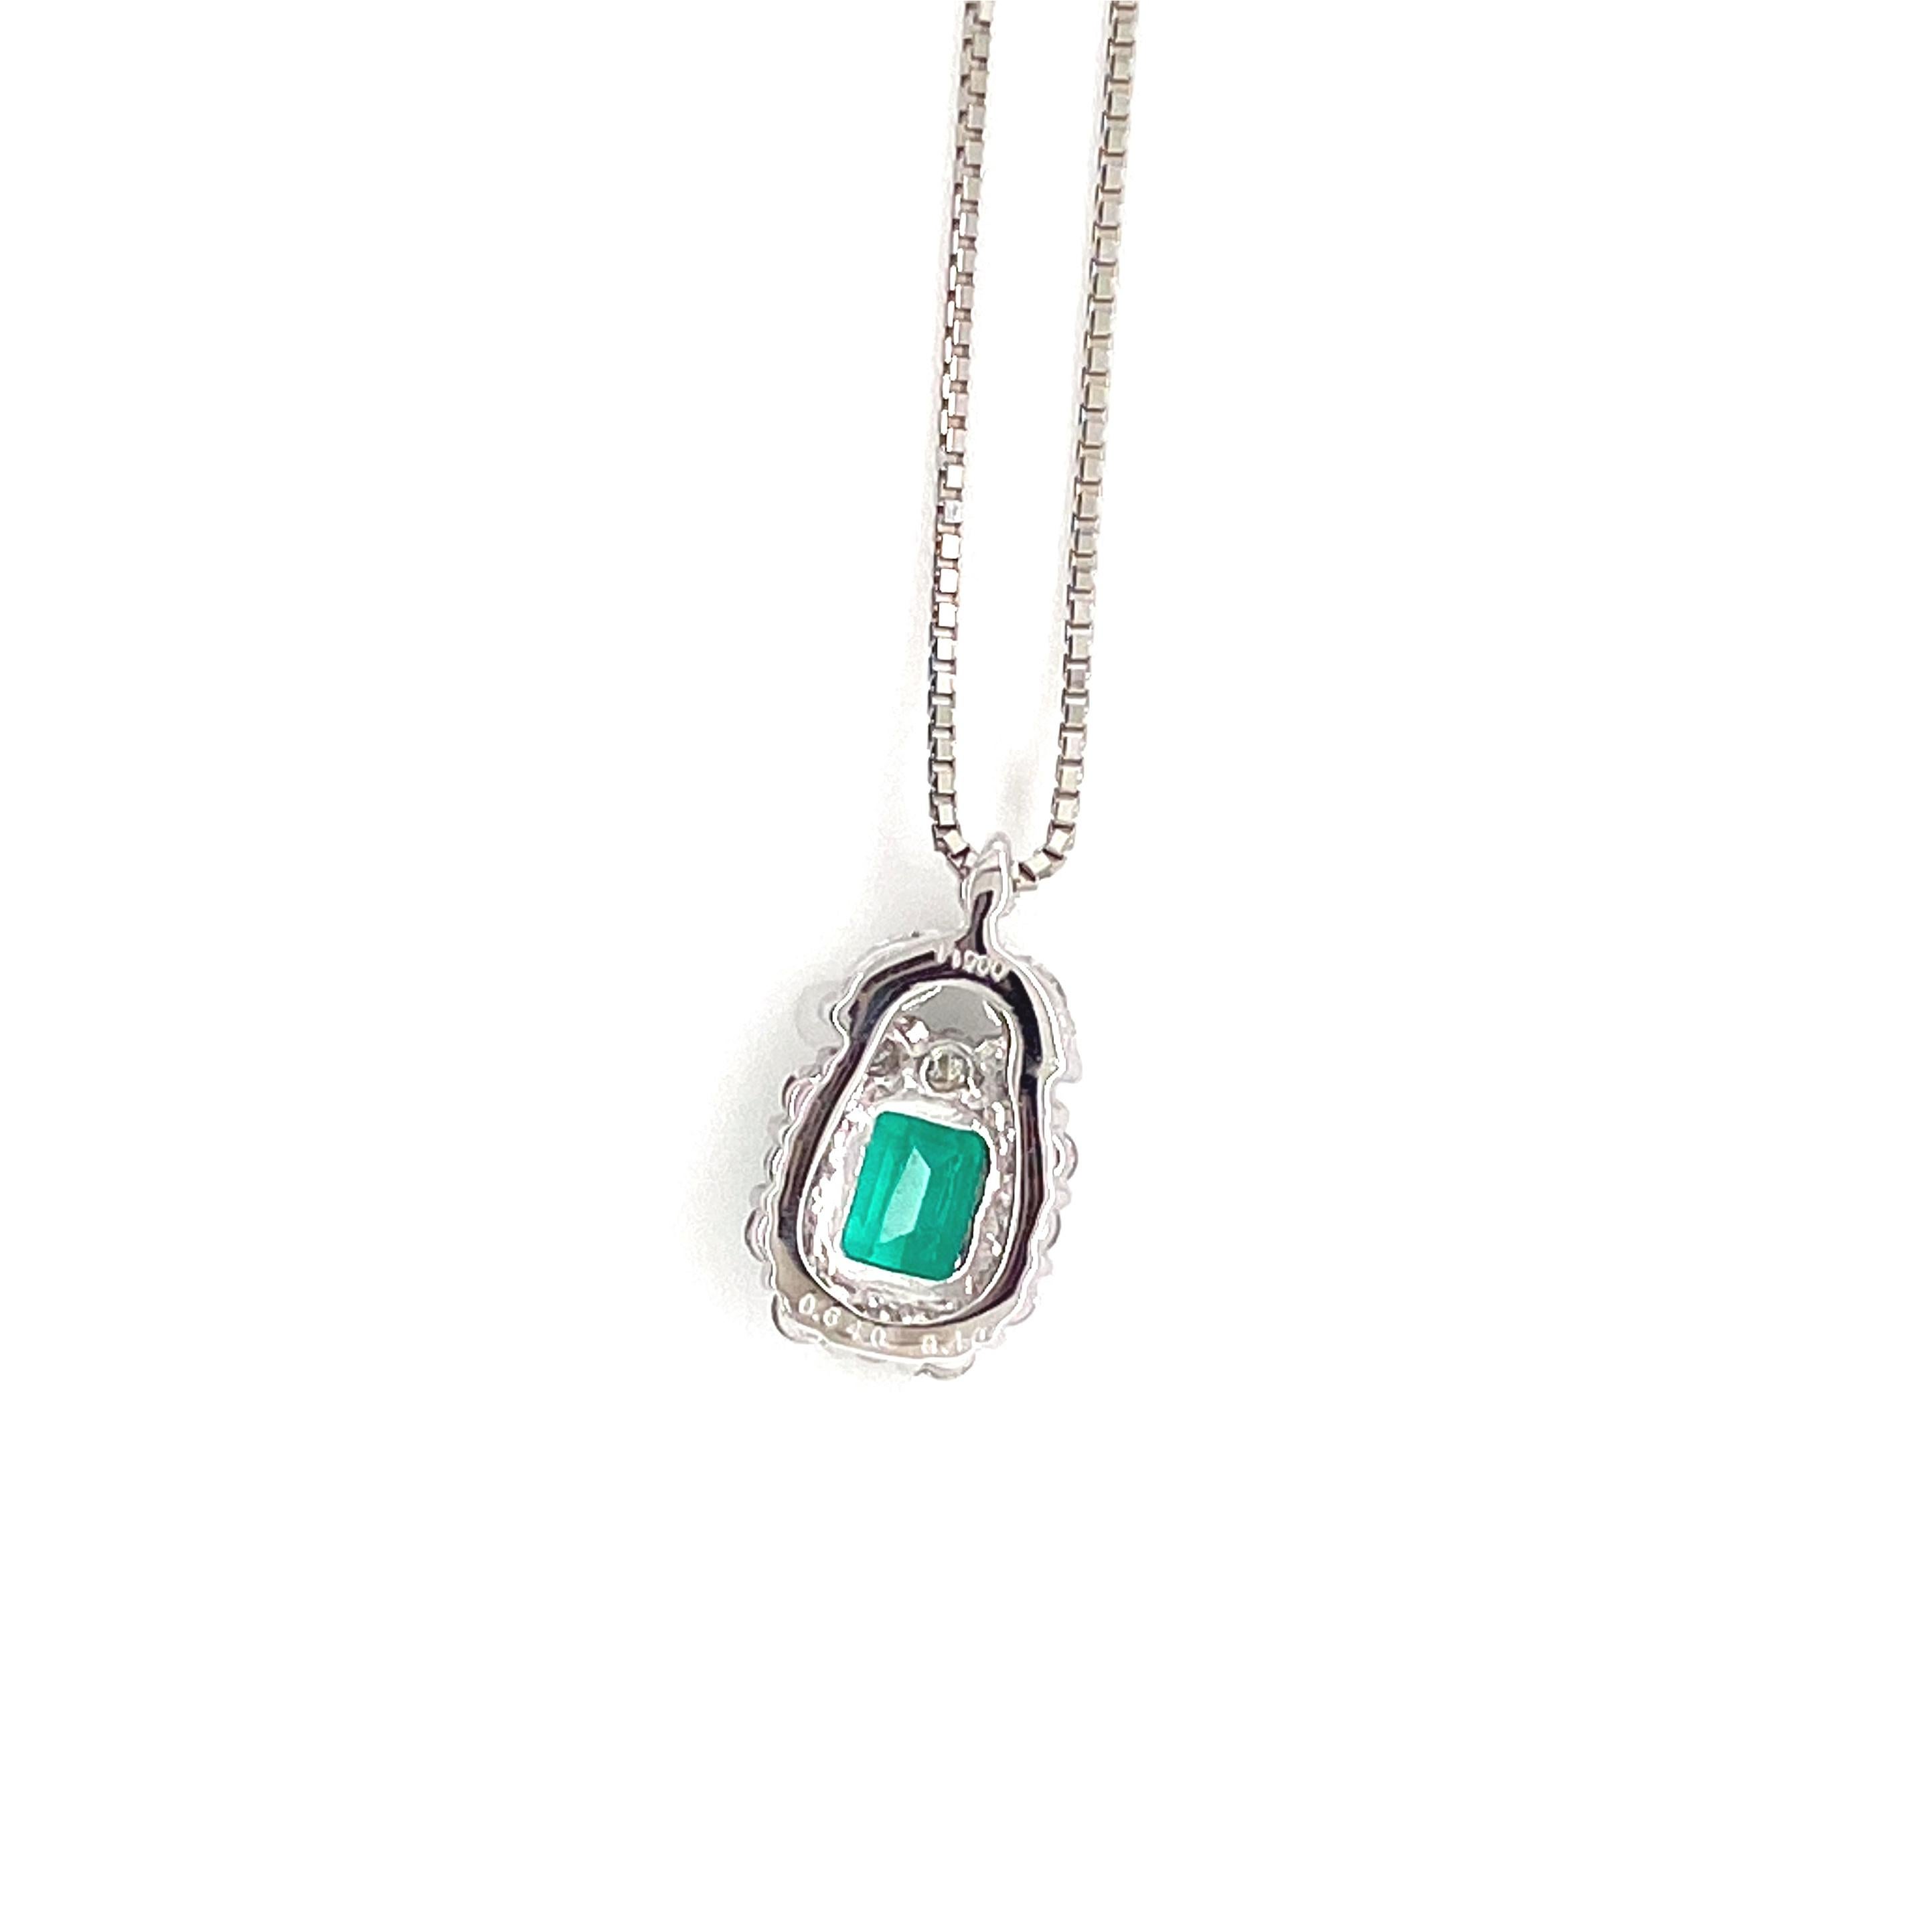 A stunning Pendant Necklace featuring a CGL Certified 0.64 Carat No Oil Emerald and 0.40 Carats of Diamond Accents set in Platinum. People have admired emerald’s green for thousands of years. Emeralds have always been associated with the lushest